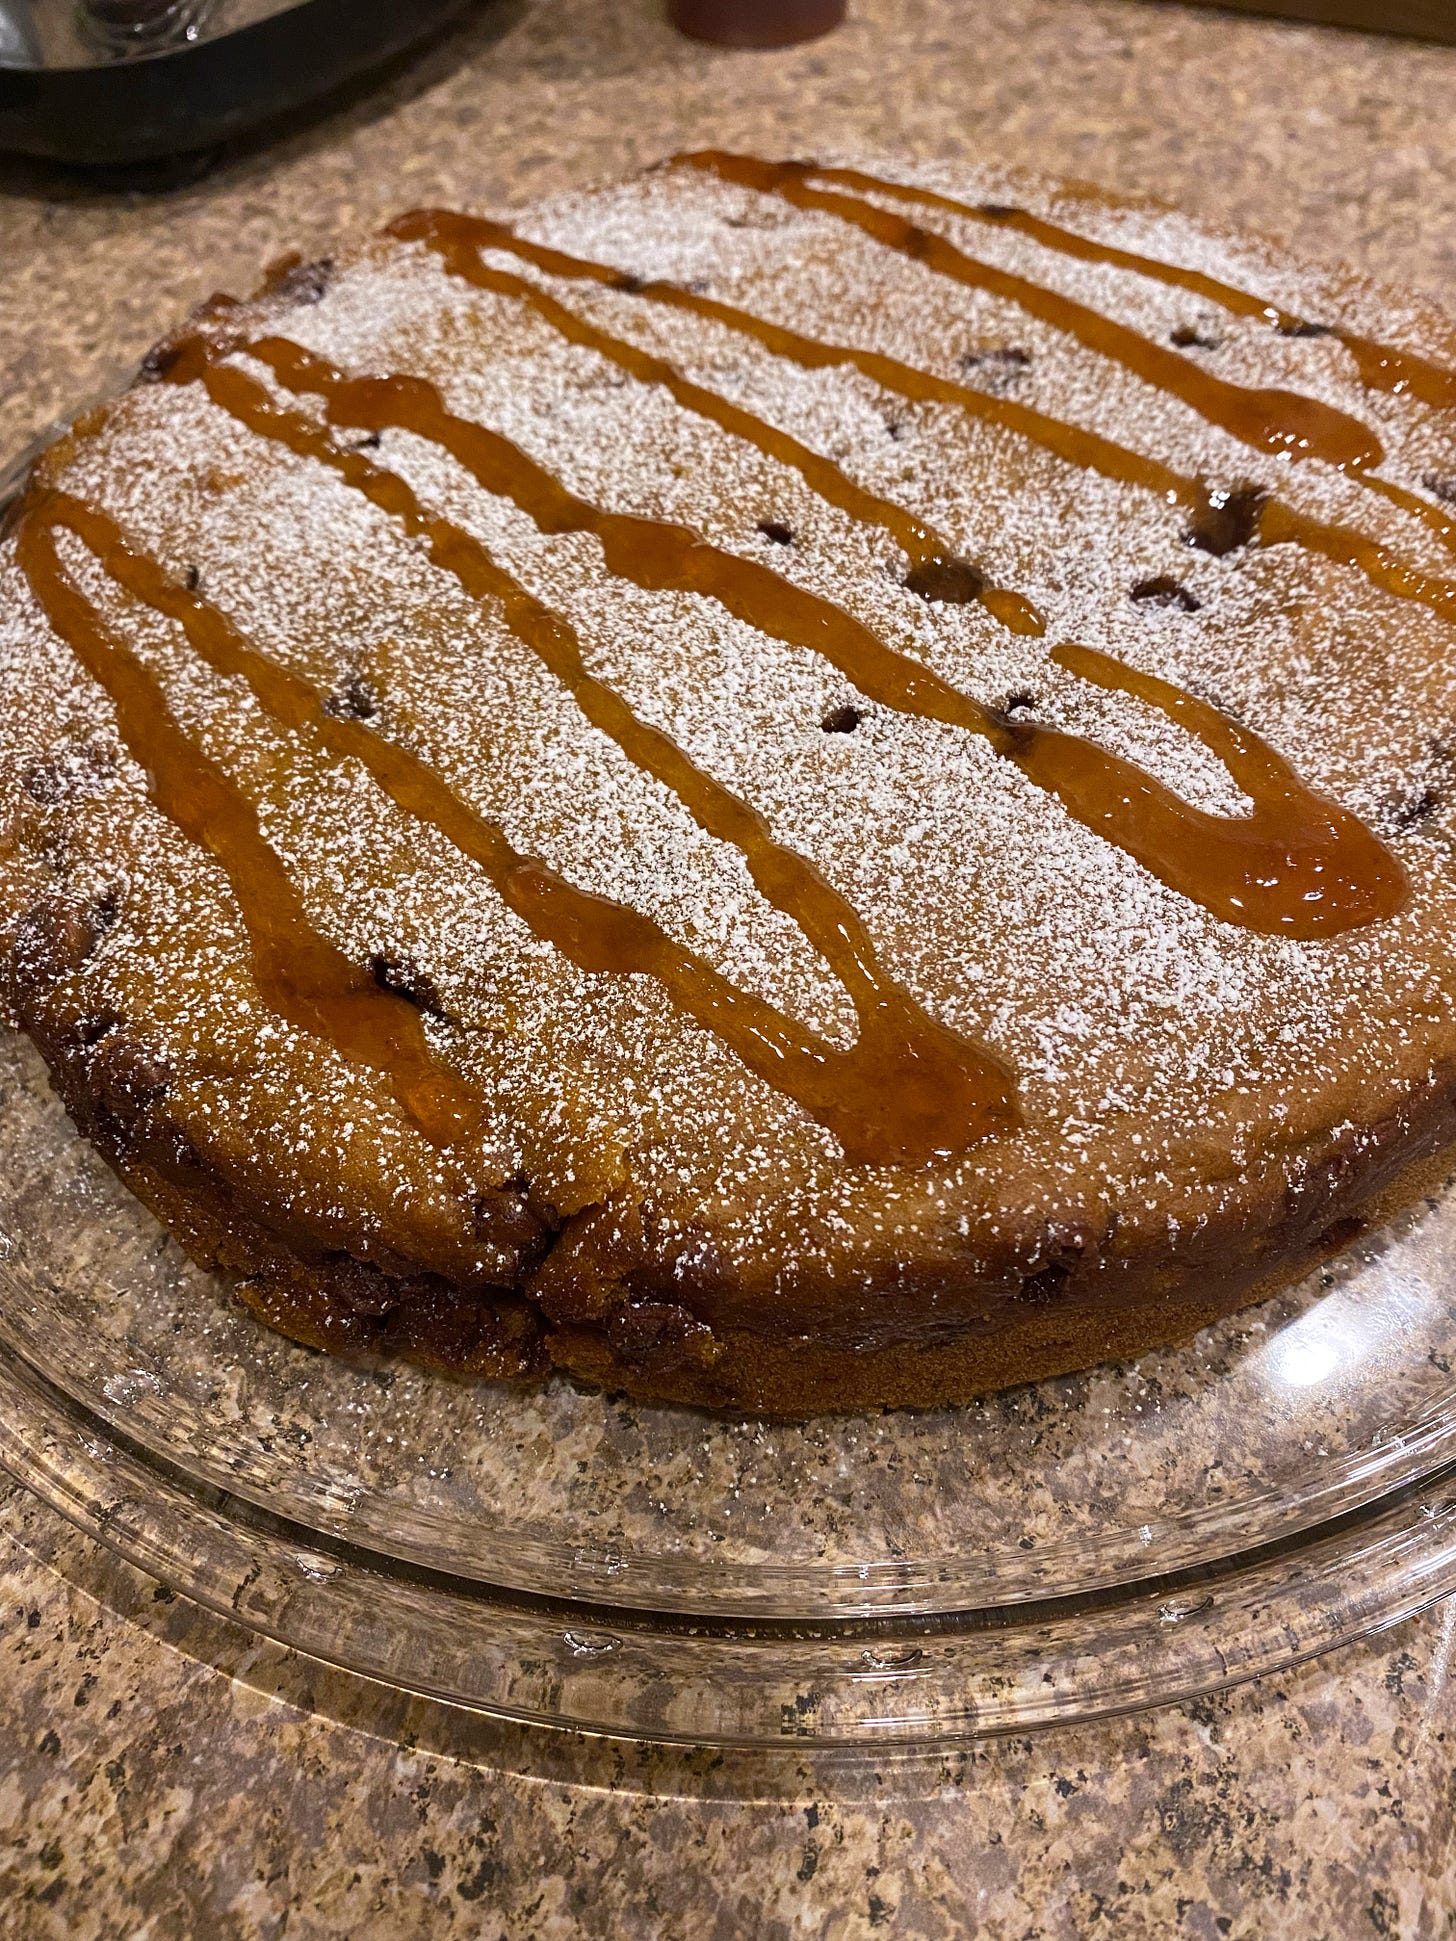 On a clear glass cake plate, a large round single-layer pumpkin cake with chocolate chips. On top is a dusting of powdered sugar and a drizzle of apple syrup.